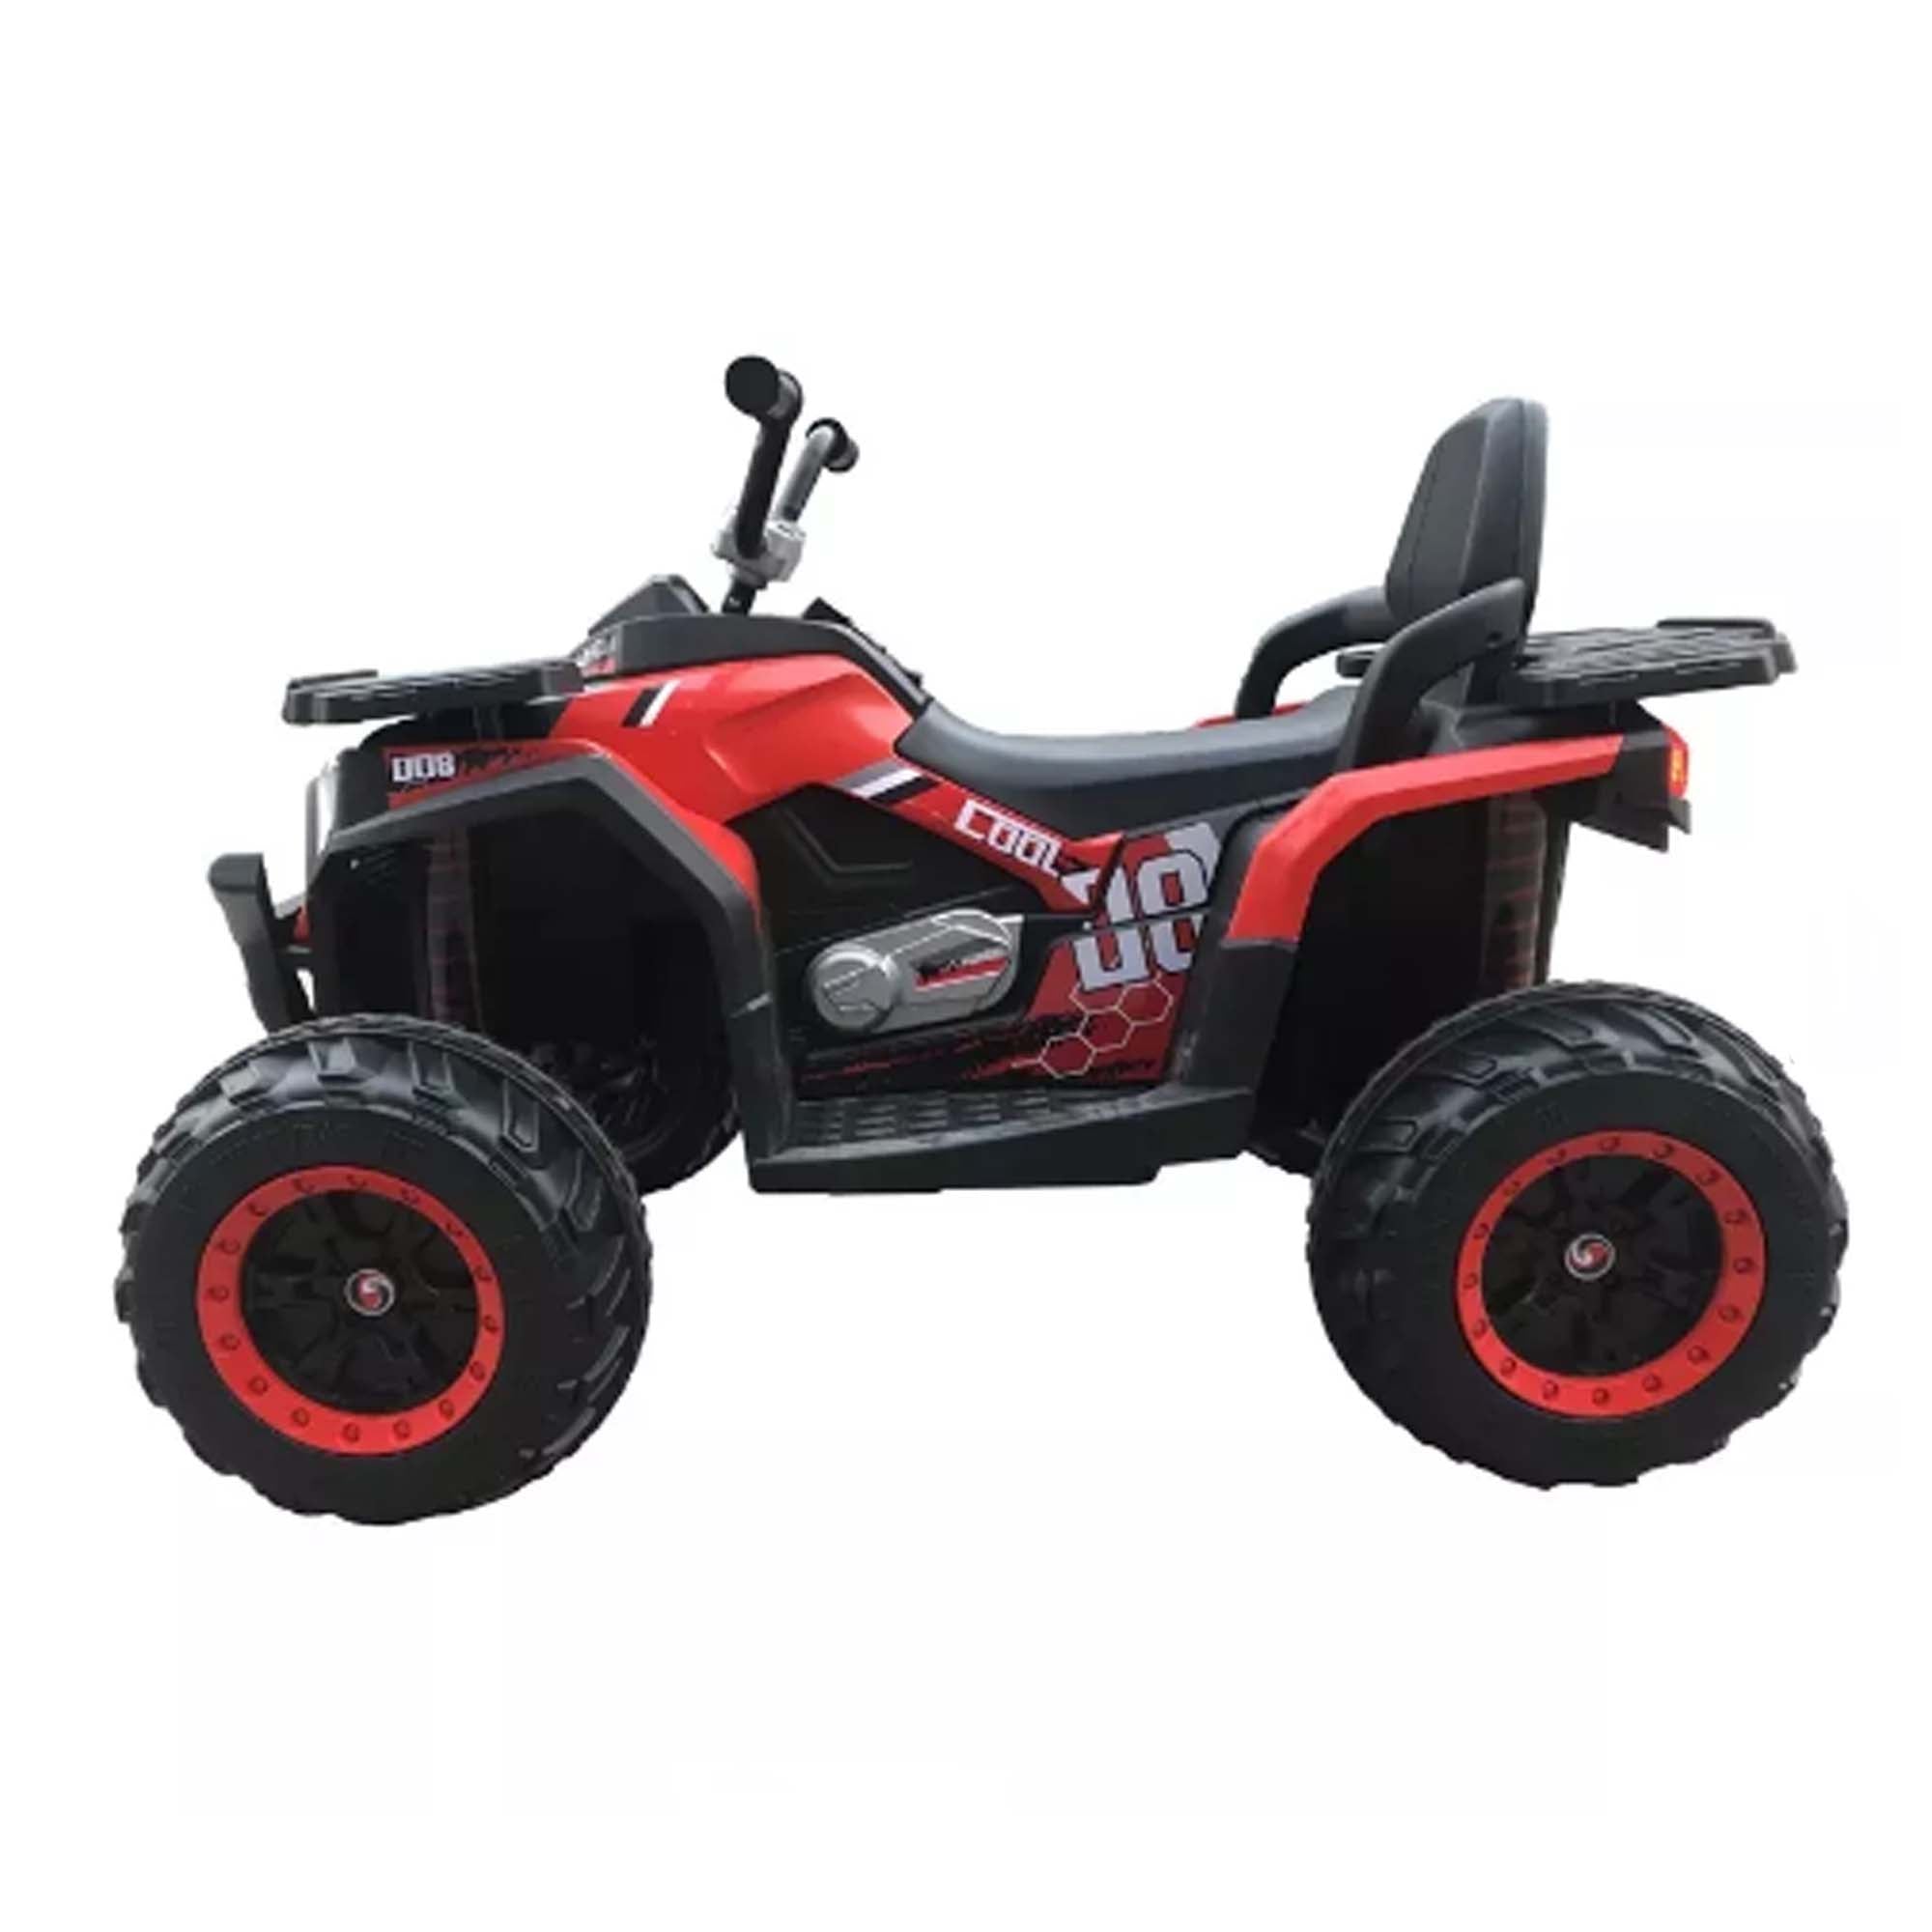 Ultimate Off-Road Thrills with the NEL-007 Ride On Bike ATV Quad with 4 Wheels - DerakBikes